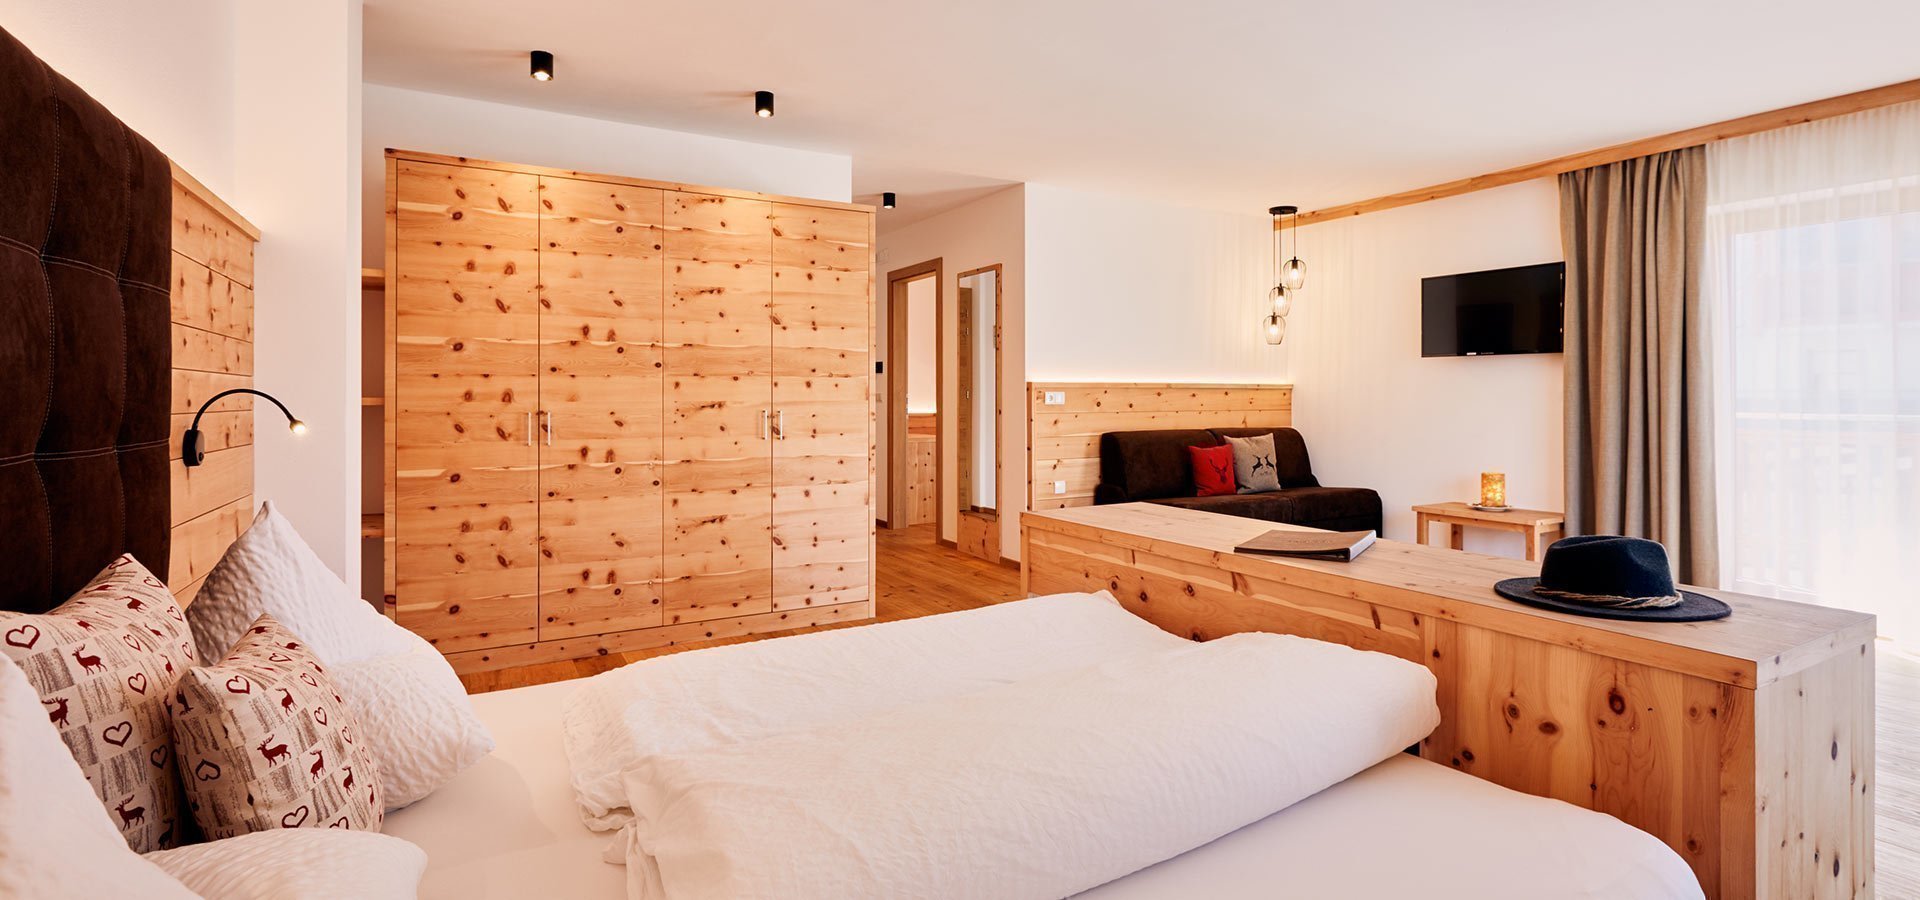 Accomodation Rooms in Maranza Val Isarco South Tyrol